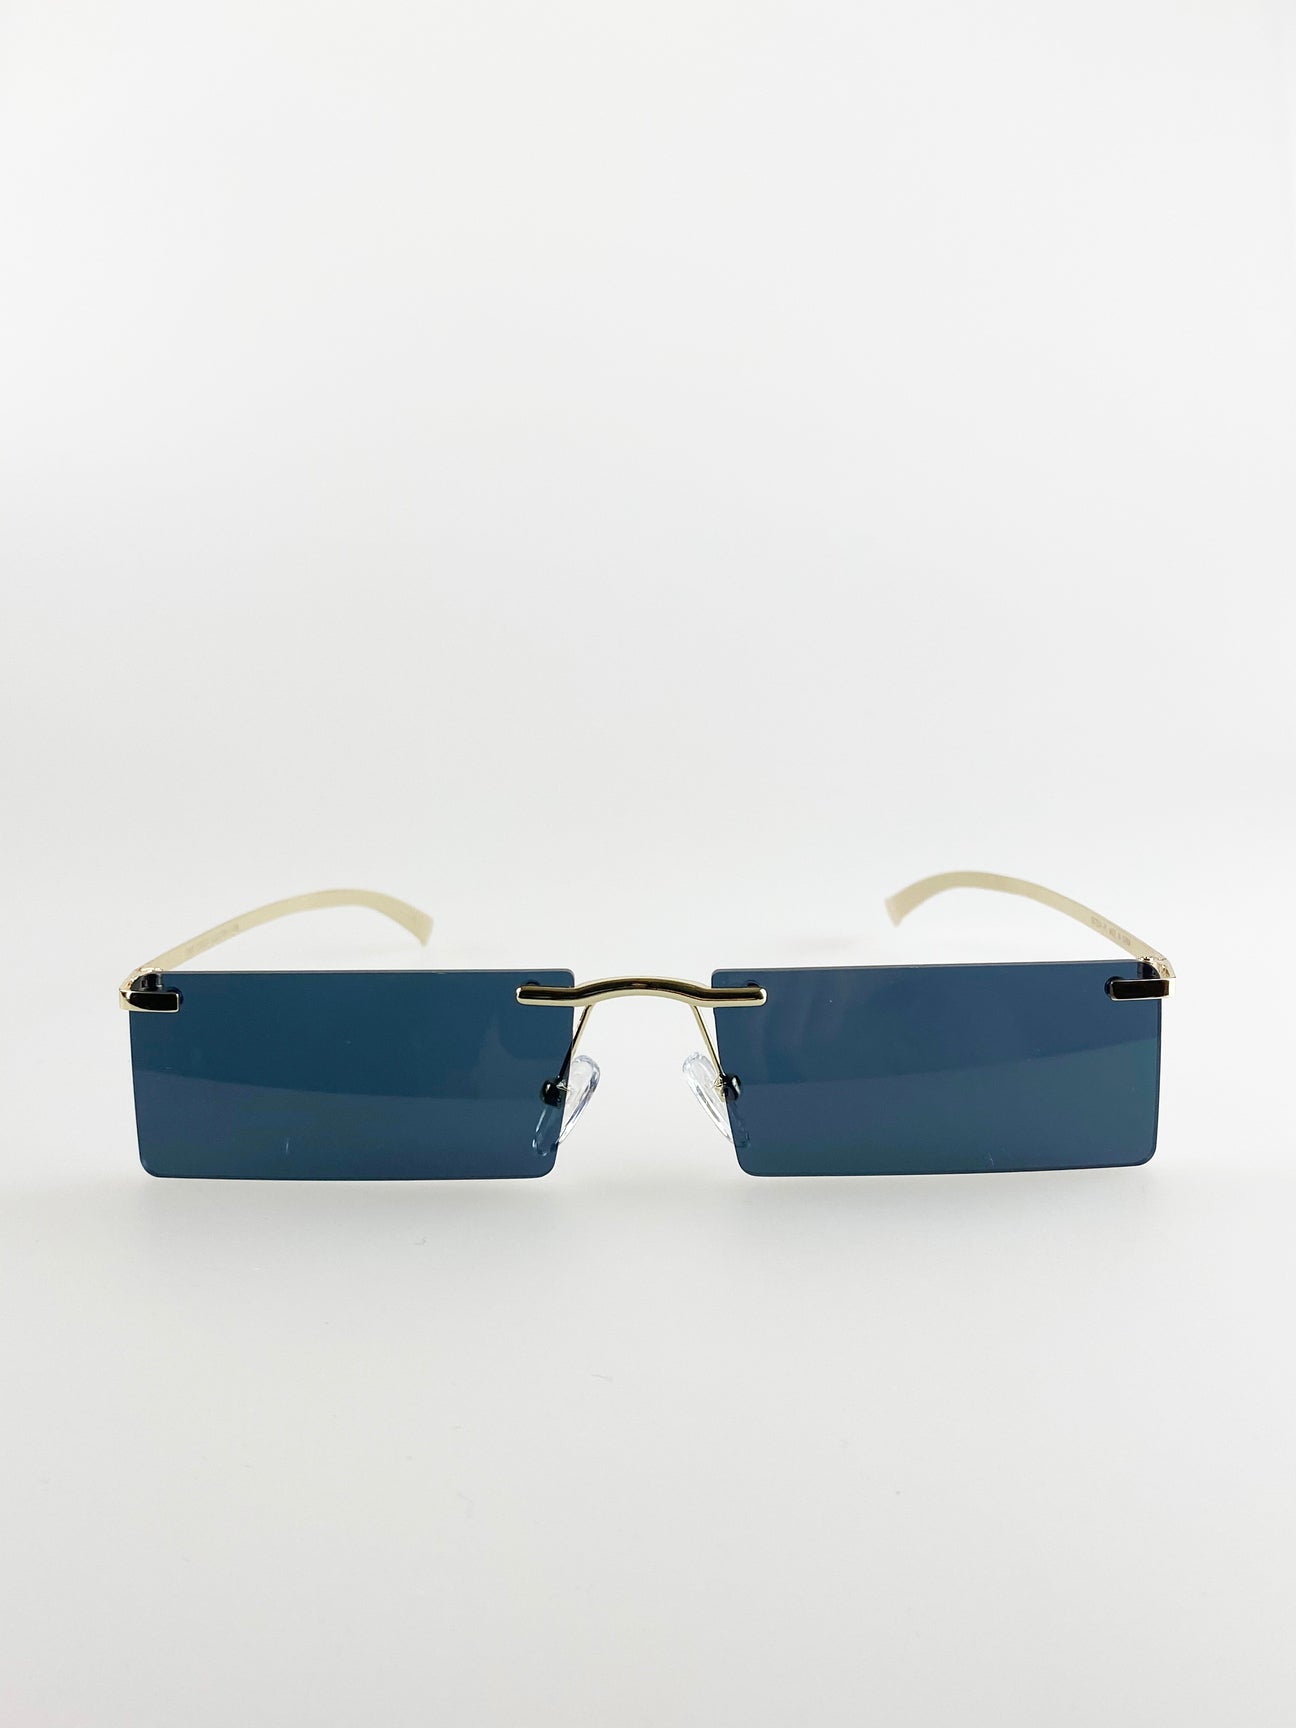 Black Frameless Rectangle Sunglasses with Metal Arms